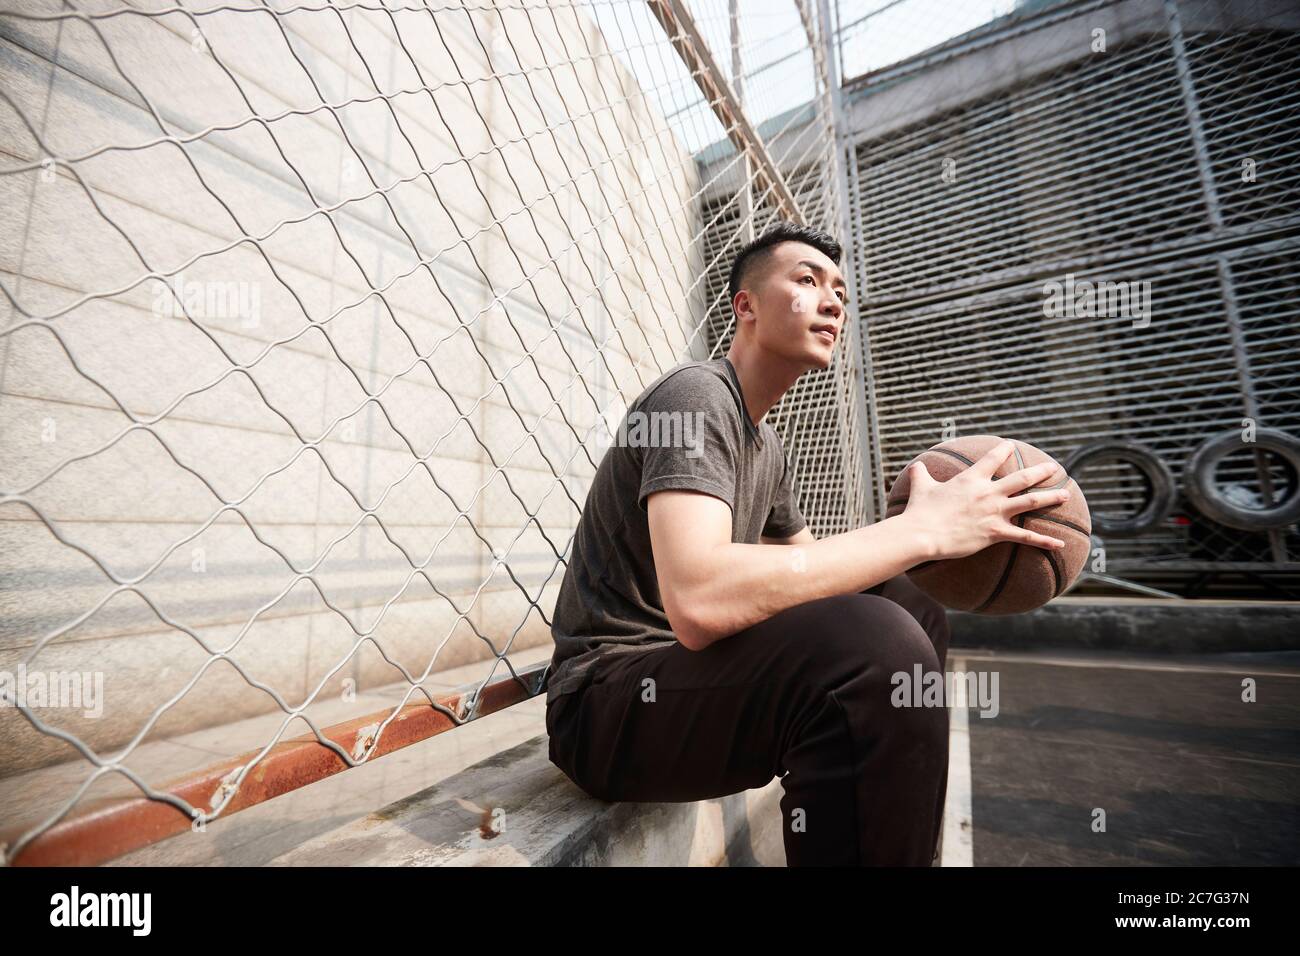 asian young adult man basketball player sitting resting at courtside Stock Photo